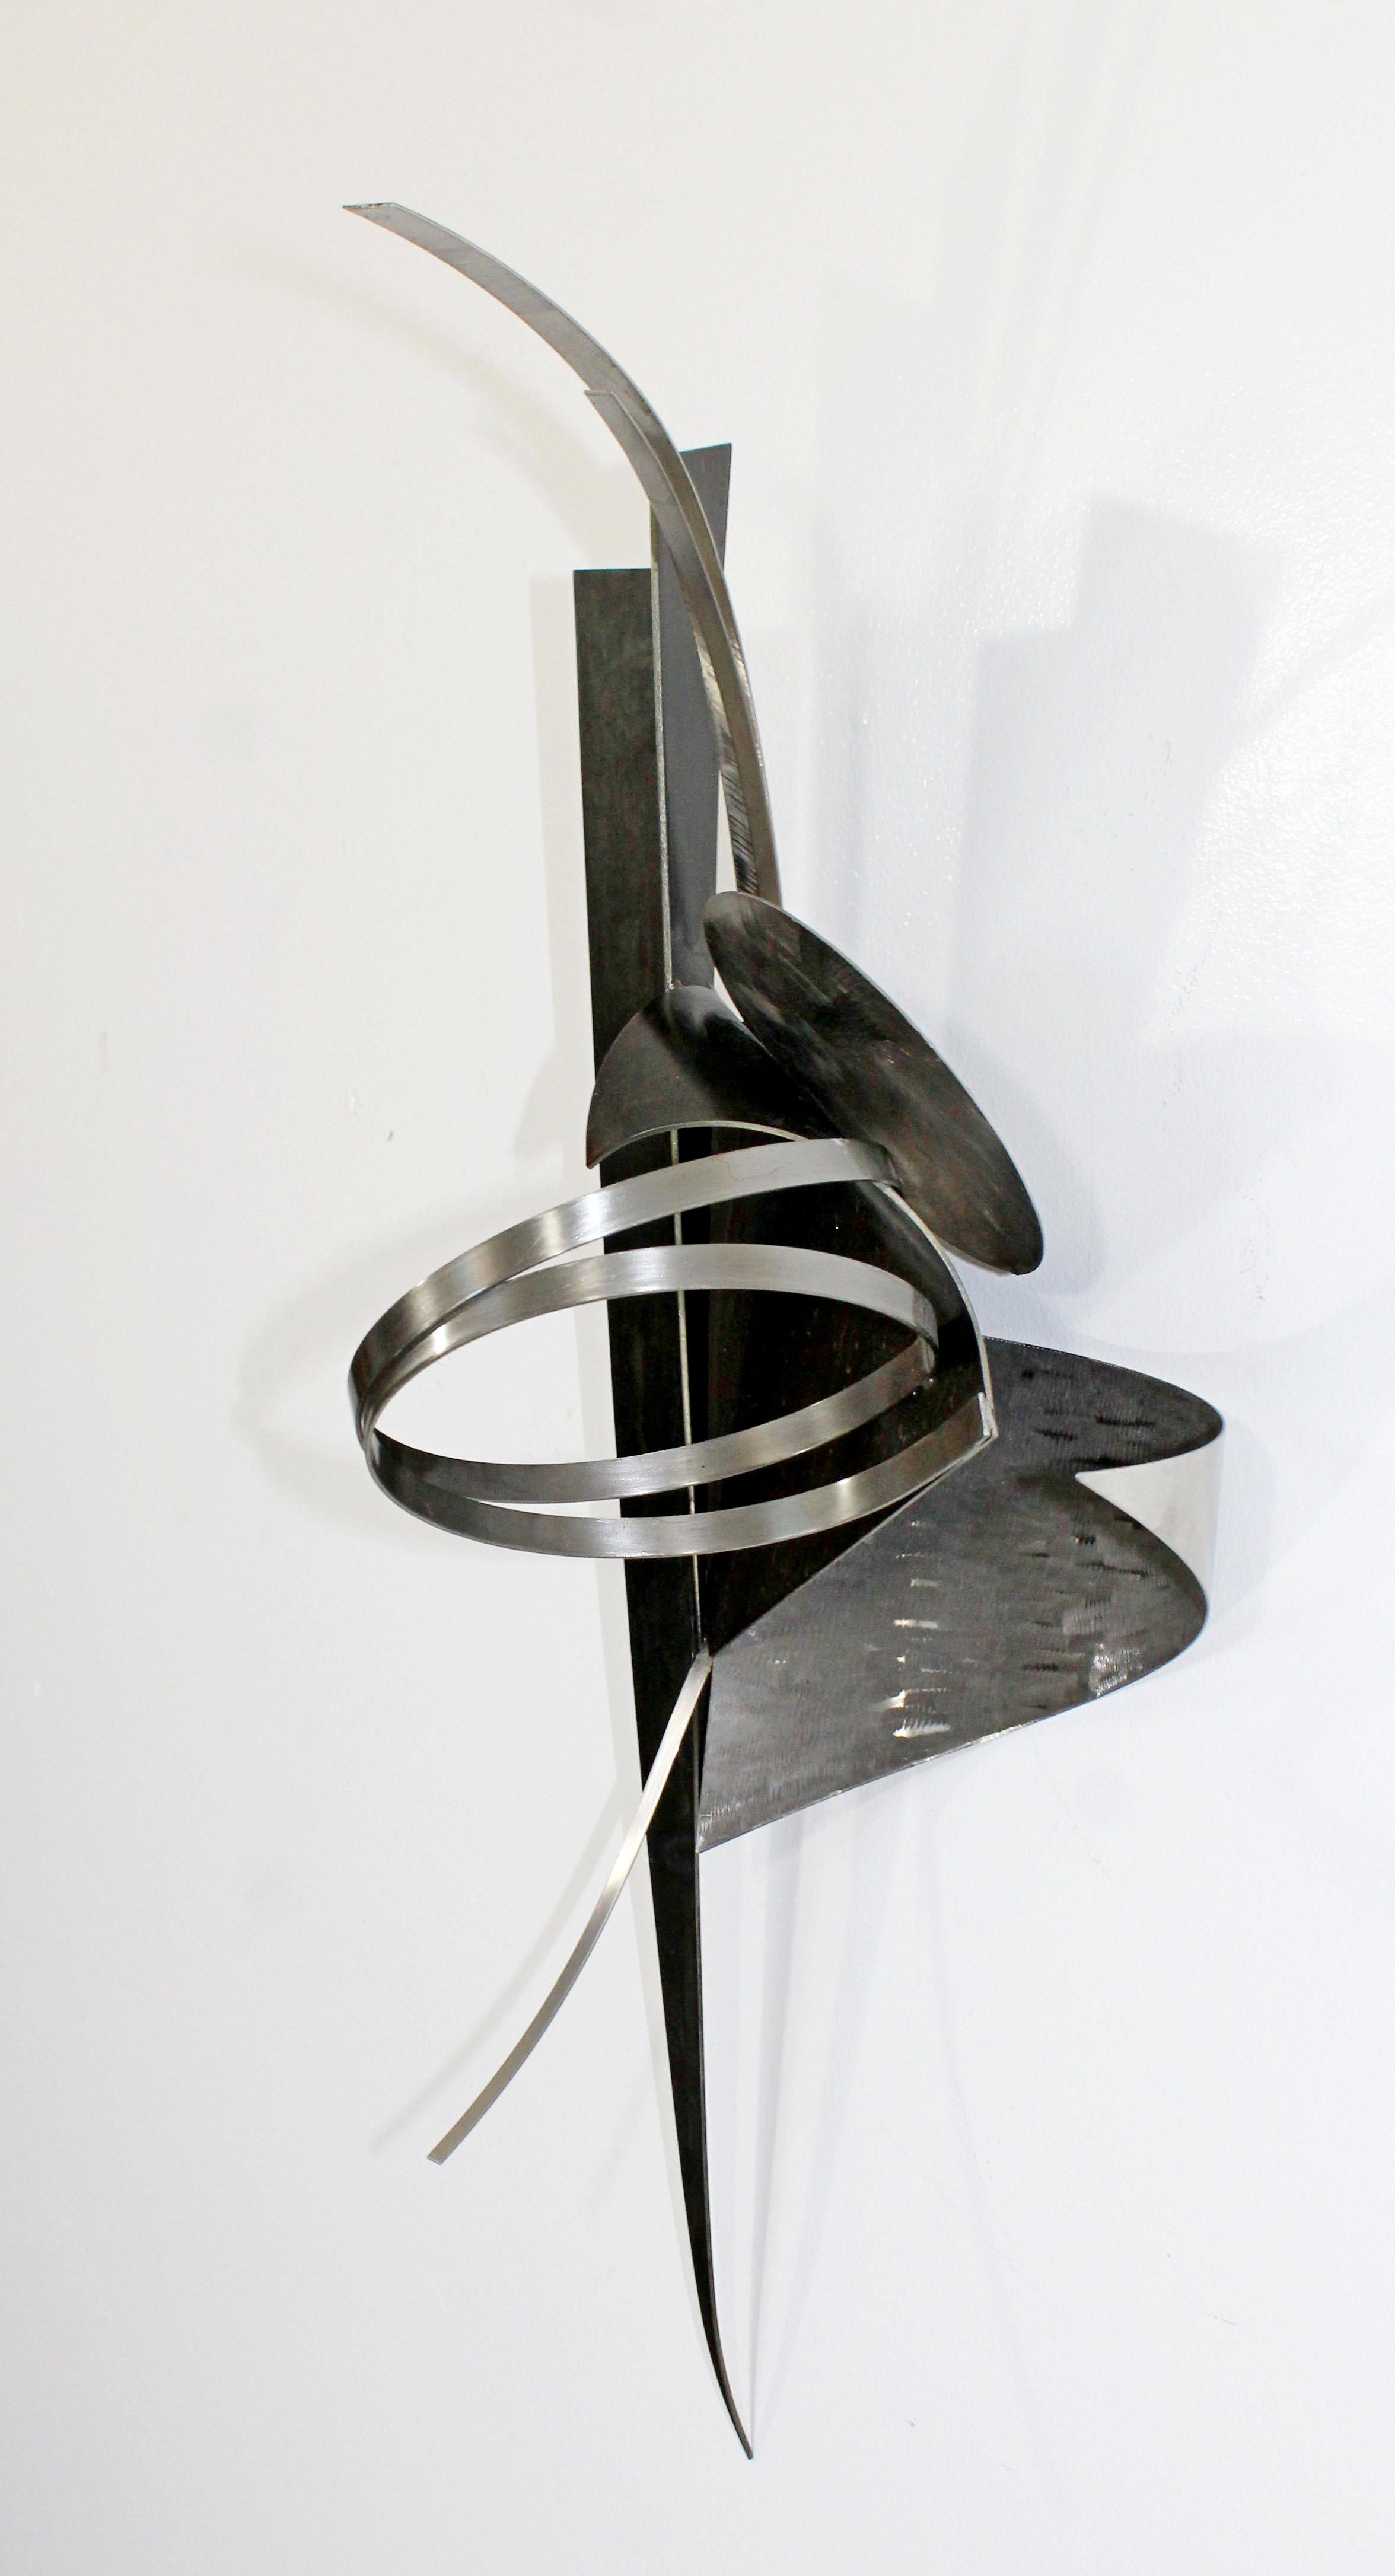 American Contemporary Signed Steel Metal Wall Sculpture Signed Christiane Martens, 1990s For Sale